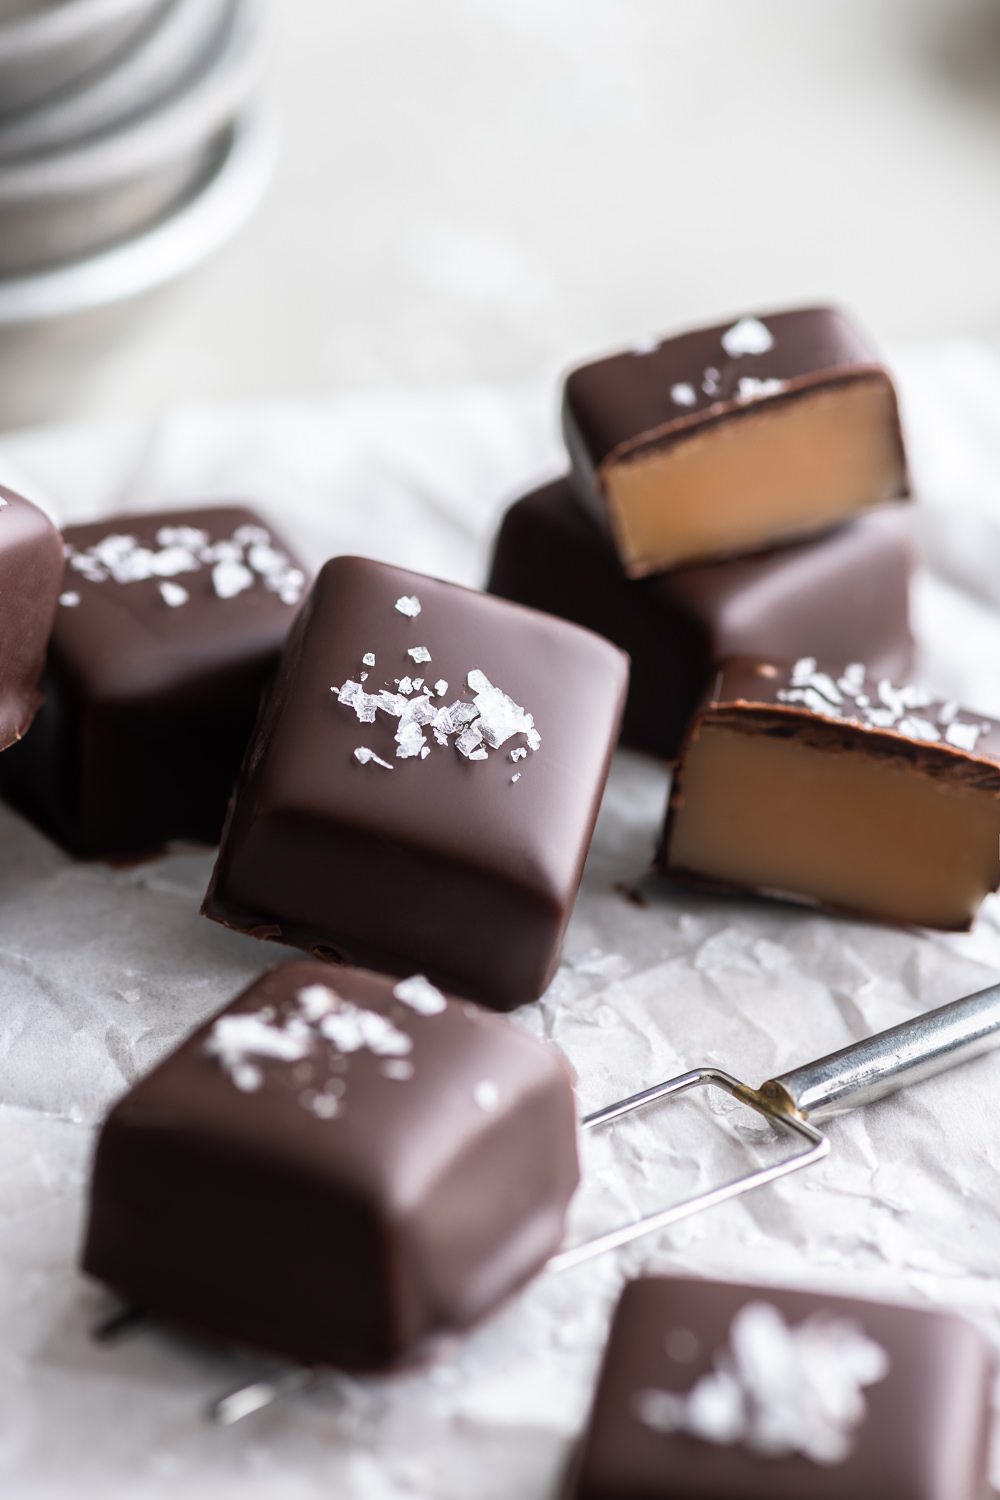 Homemade Caramels - Chocolate Chocolate and More!